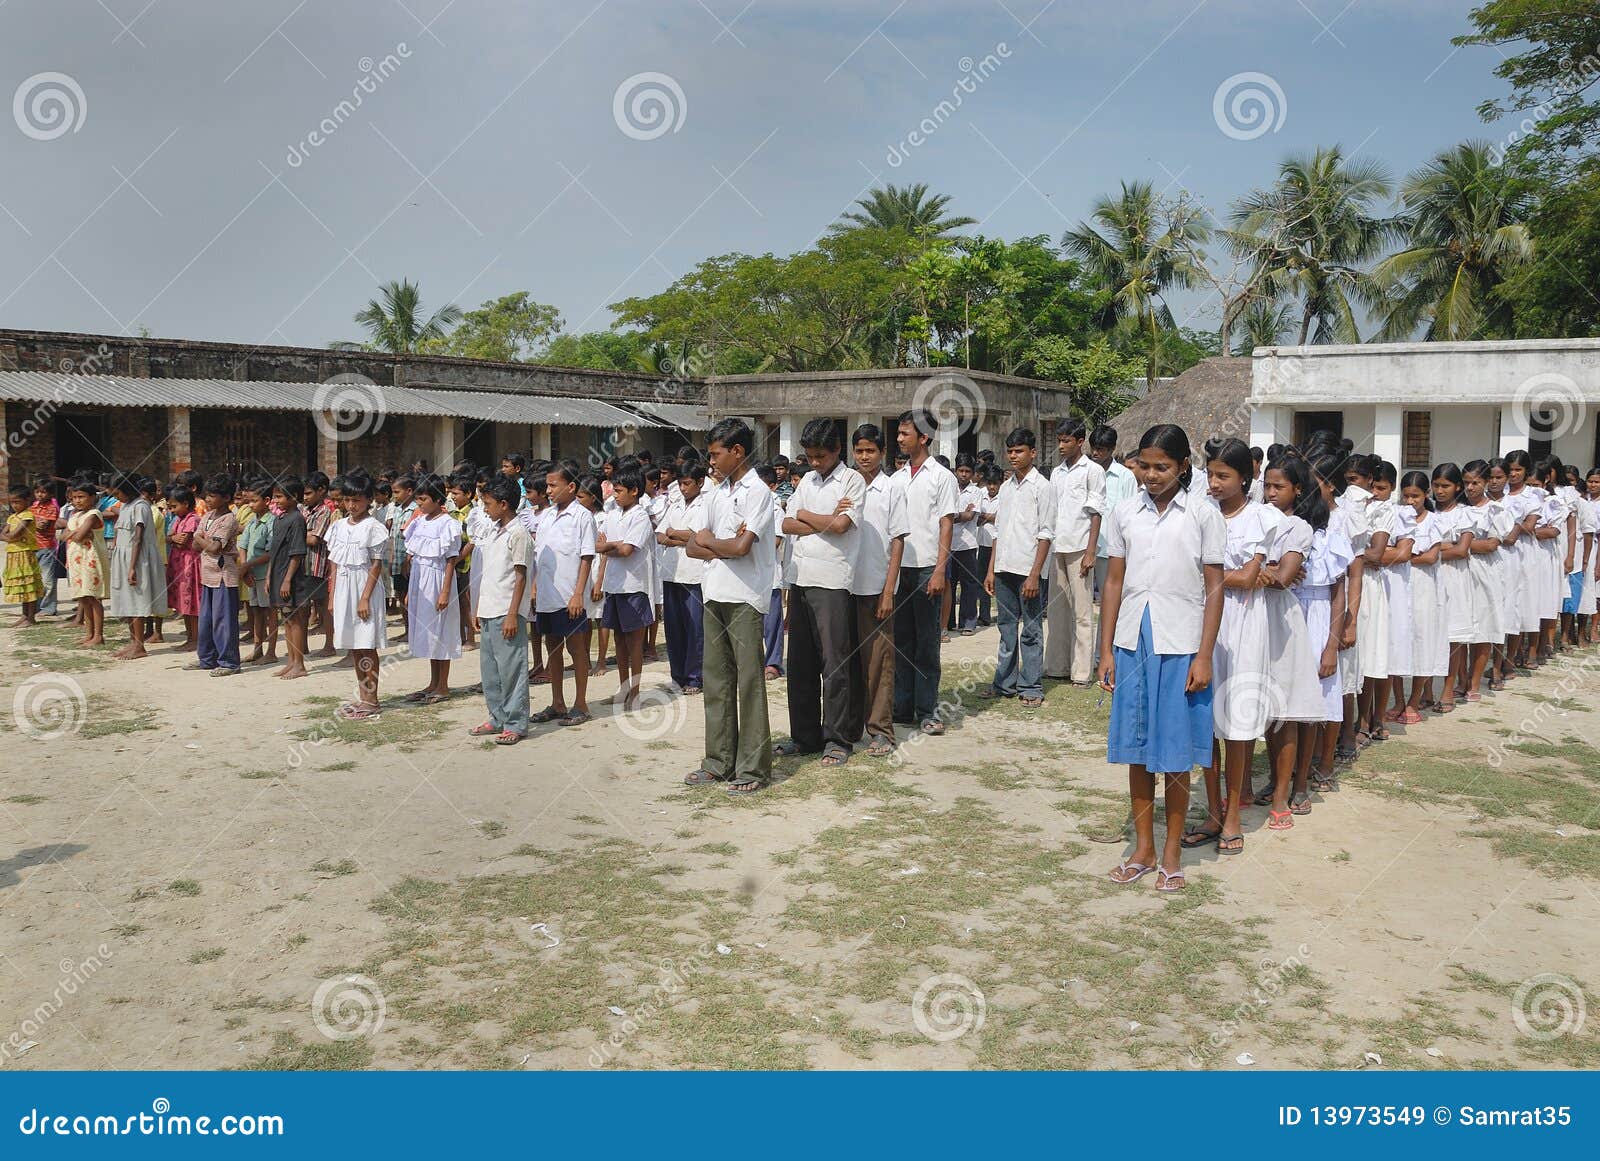 Prayer Of The School Students. Editorial Stock Image - Image of play, girl: 13973549